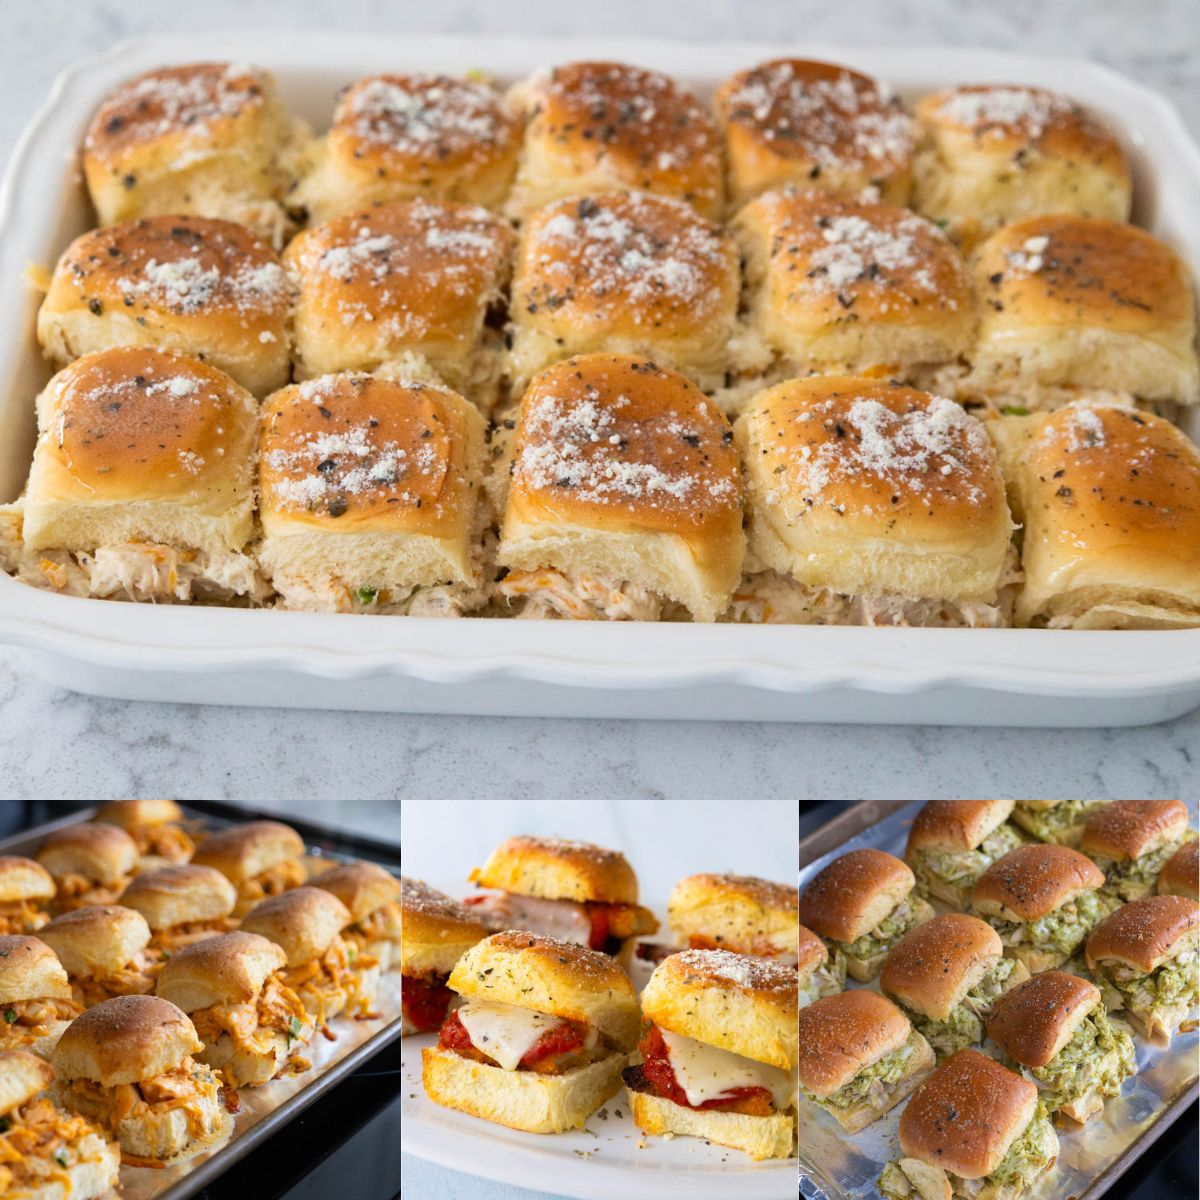 The photo collage shows 4 different kinds of chicken sliders.